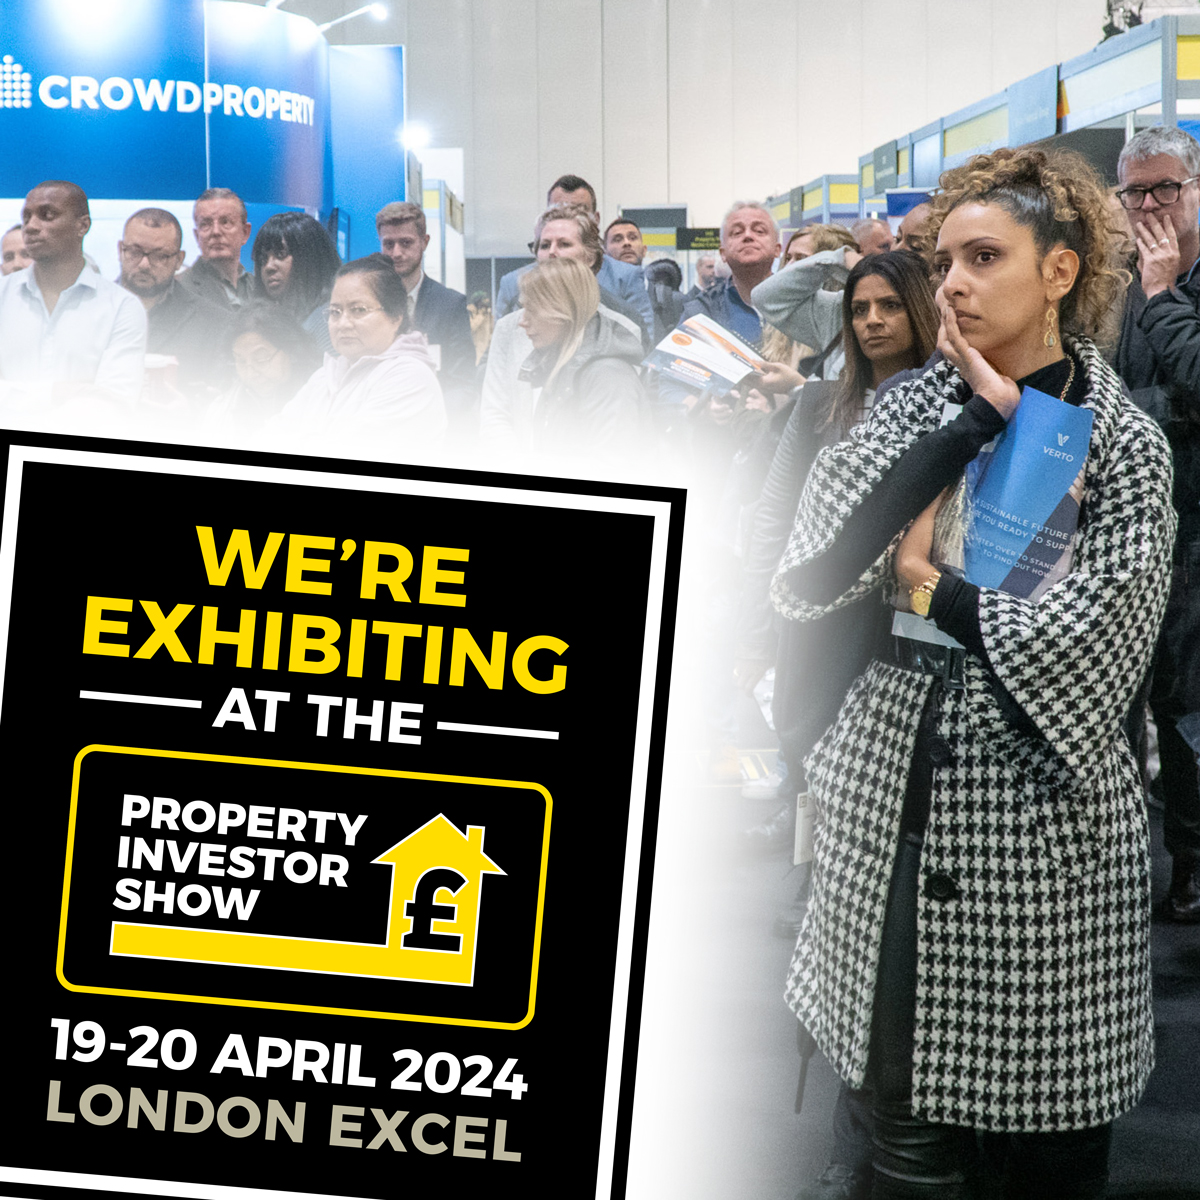 Our CEO @BeadleBen will be speaking tomorrow at the @Investor_Show @ExCeLLondon. 👇 🕙 At 10:30am Ben will deliver a session on the election. 🕑At 2:35pm Ben hosts Landlord Lens LIVE with @4_Walls. We're also exhibiting so do pop by our stand! Register: propertyinvestor.smartreg.co.uk/Visitors/Visit…